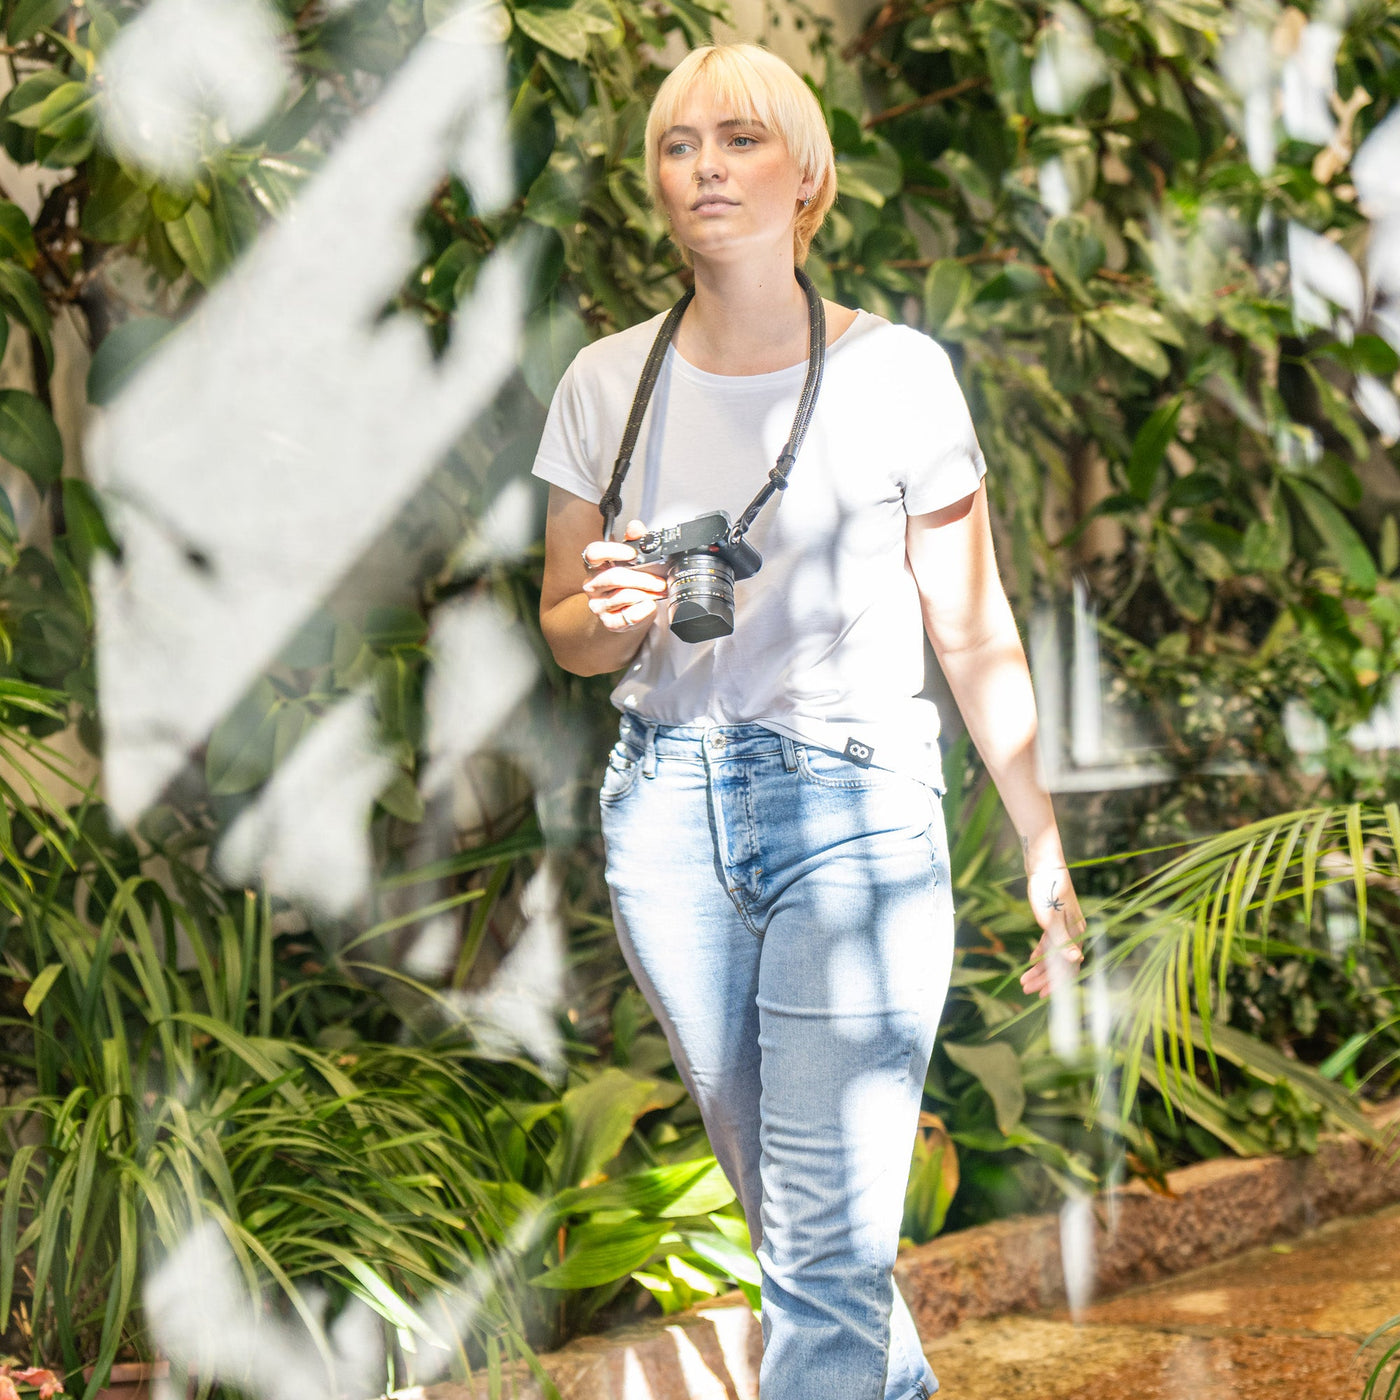 Female photographer walking in a greenhouse Leica Camera with Adjustable Rope Strap around her neck 